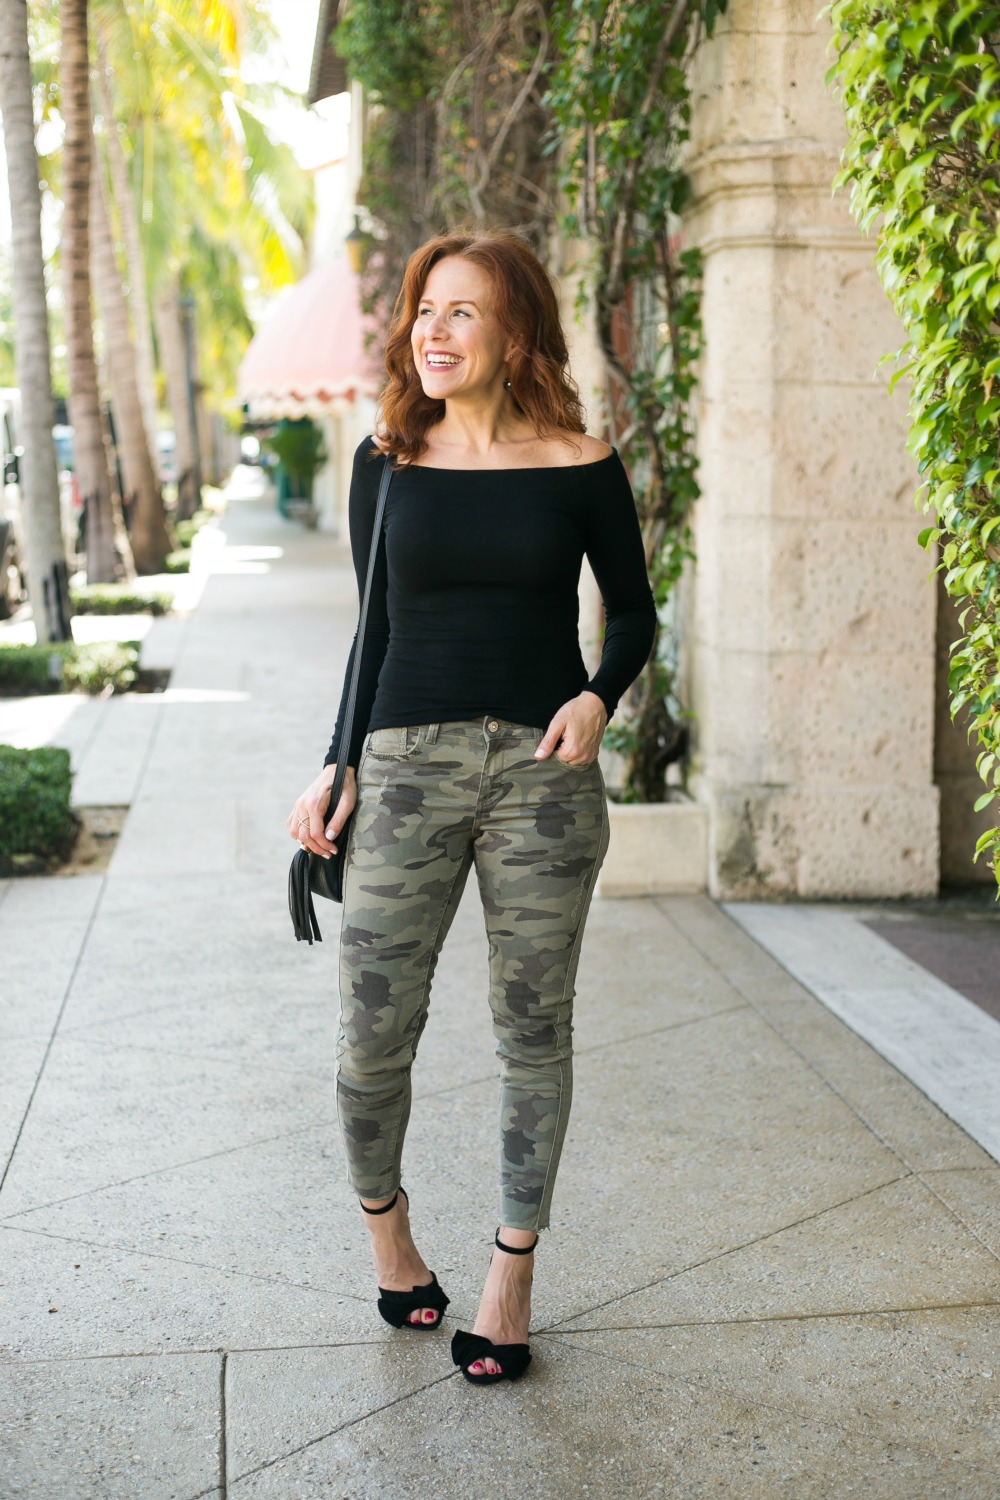 #fallstyle #casualstyle #weekendwear | Fall Trends in Warm Weather: Zara Camo Pants Two Ways featured by popular Florida fashion blogger The Modern Savvy